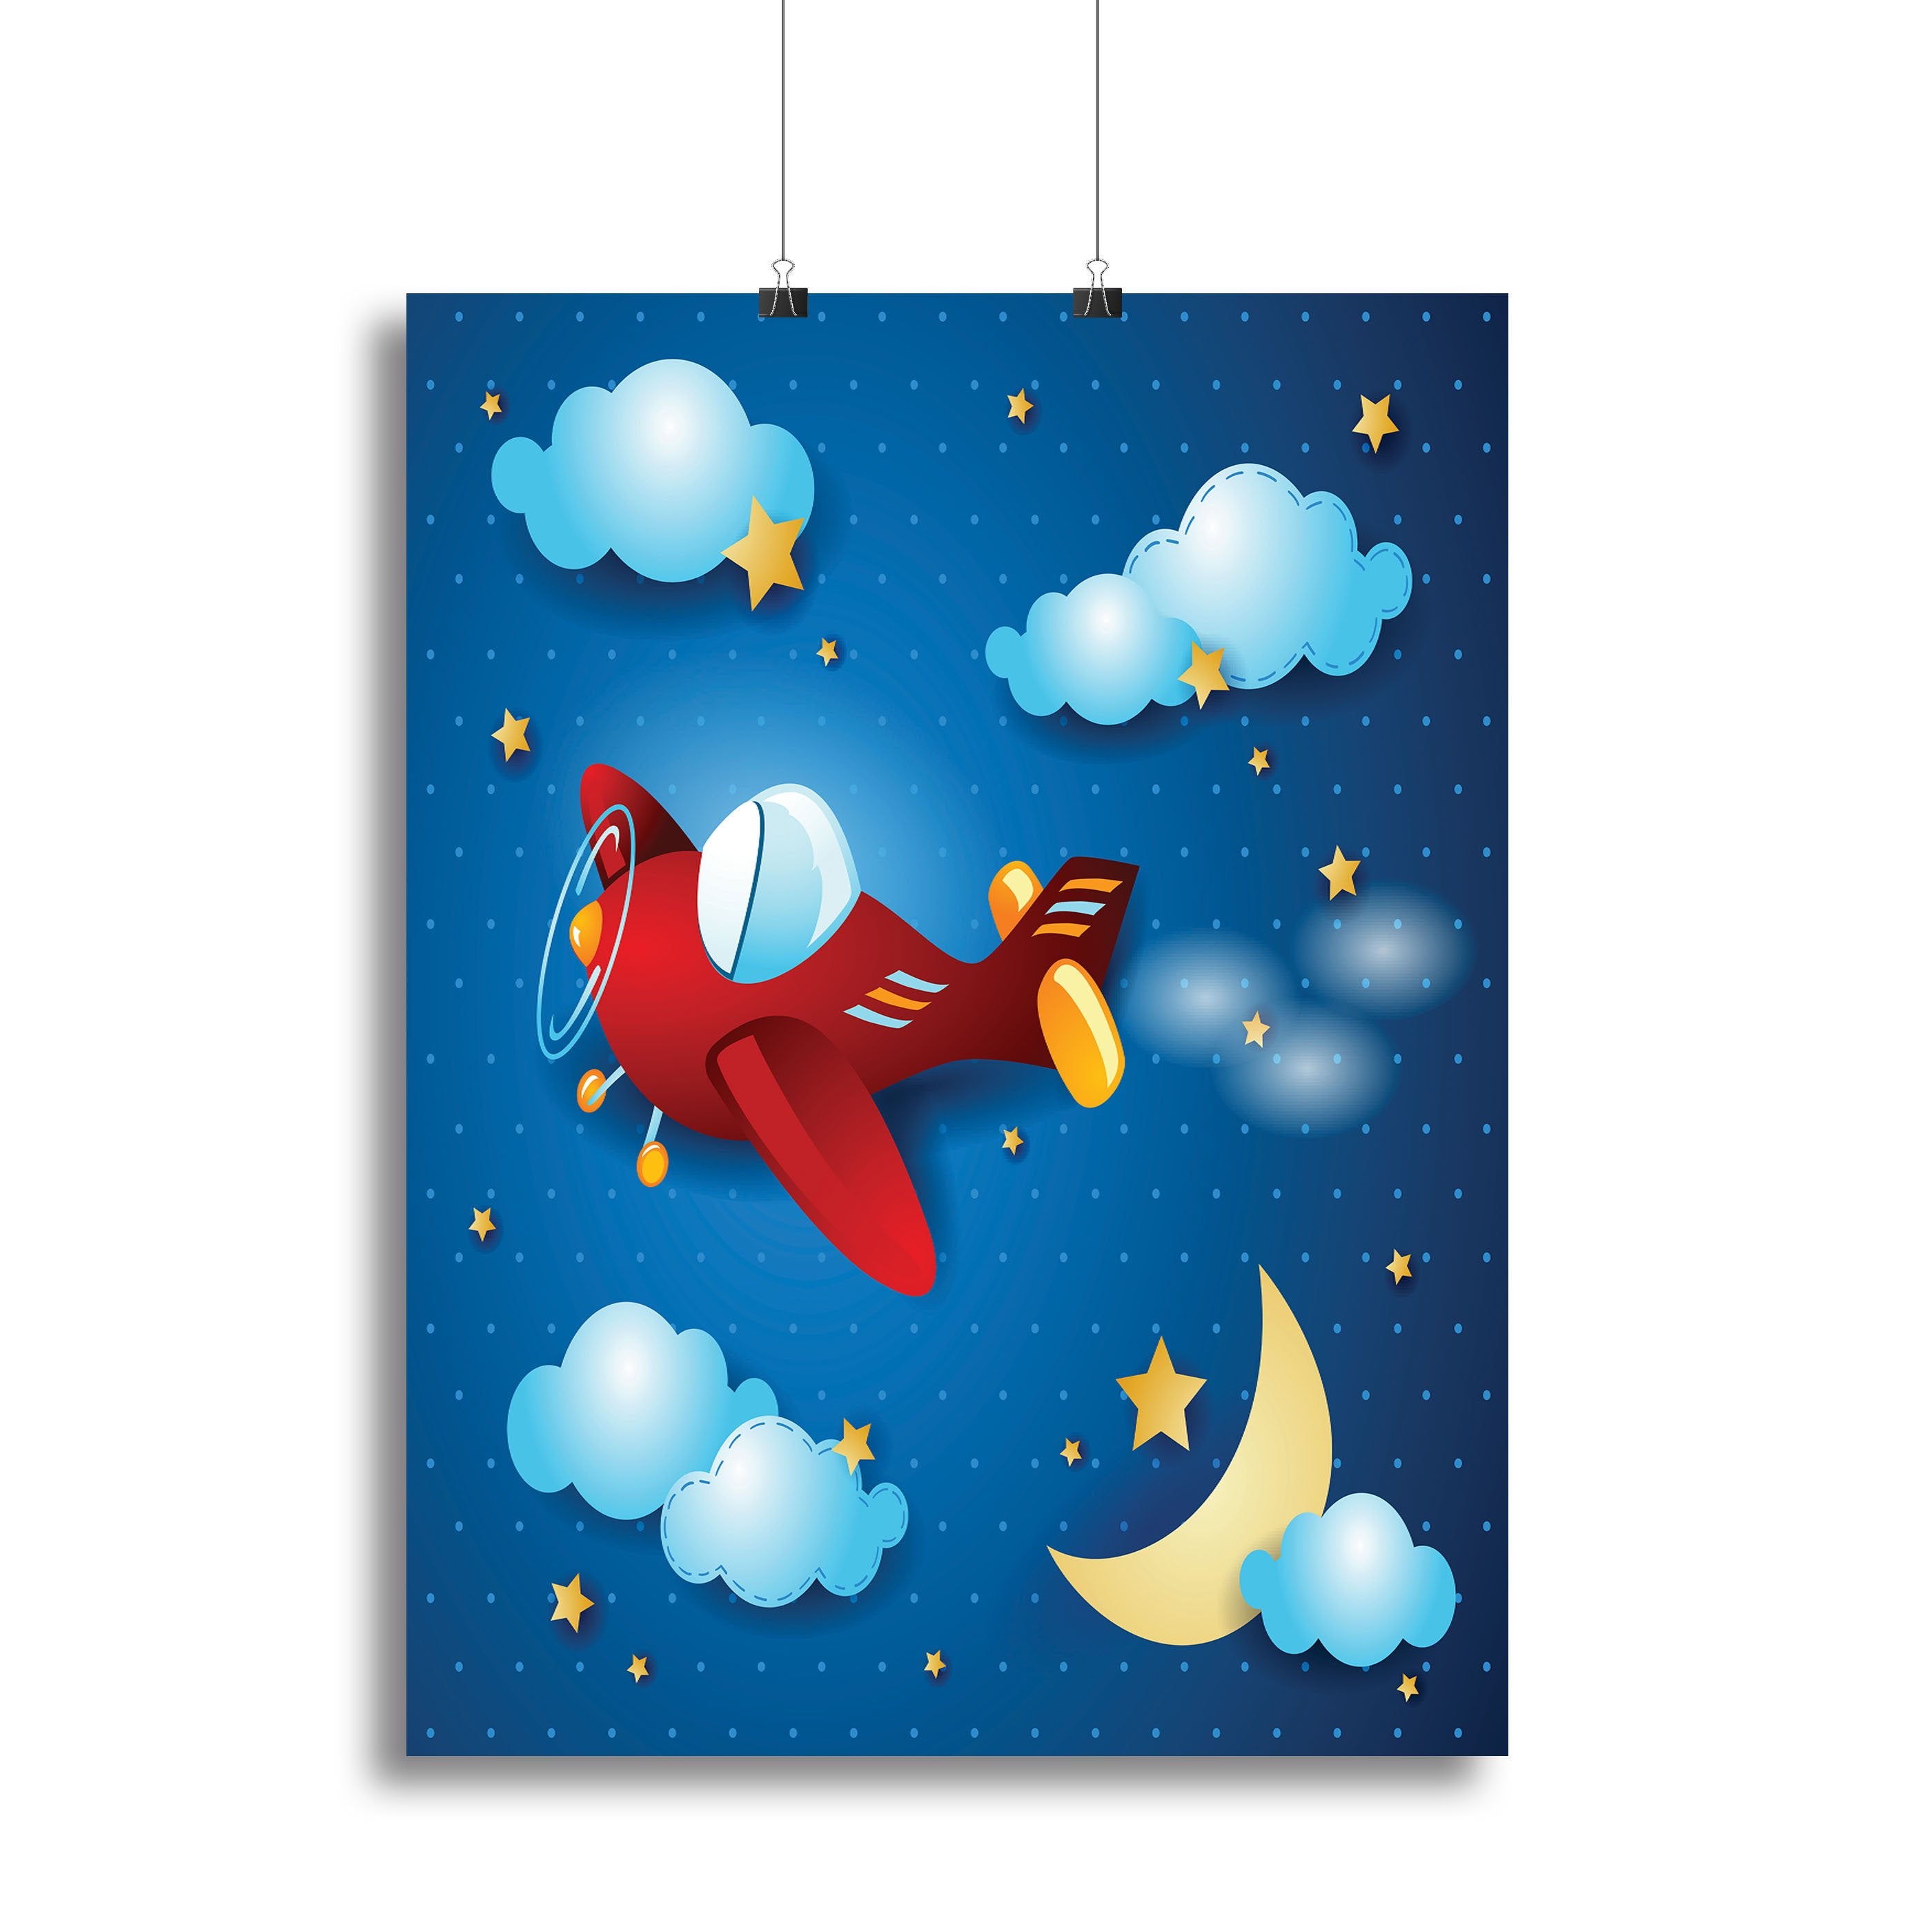 Retro airplane by night Canvas Print or Poster